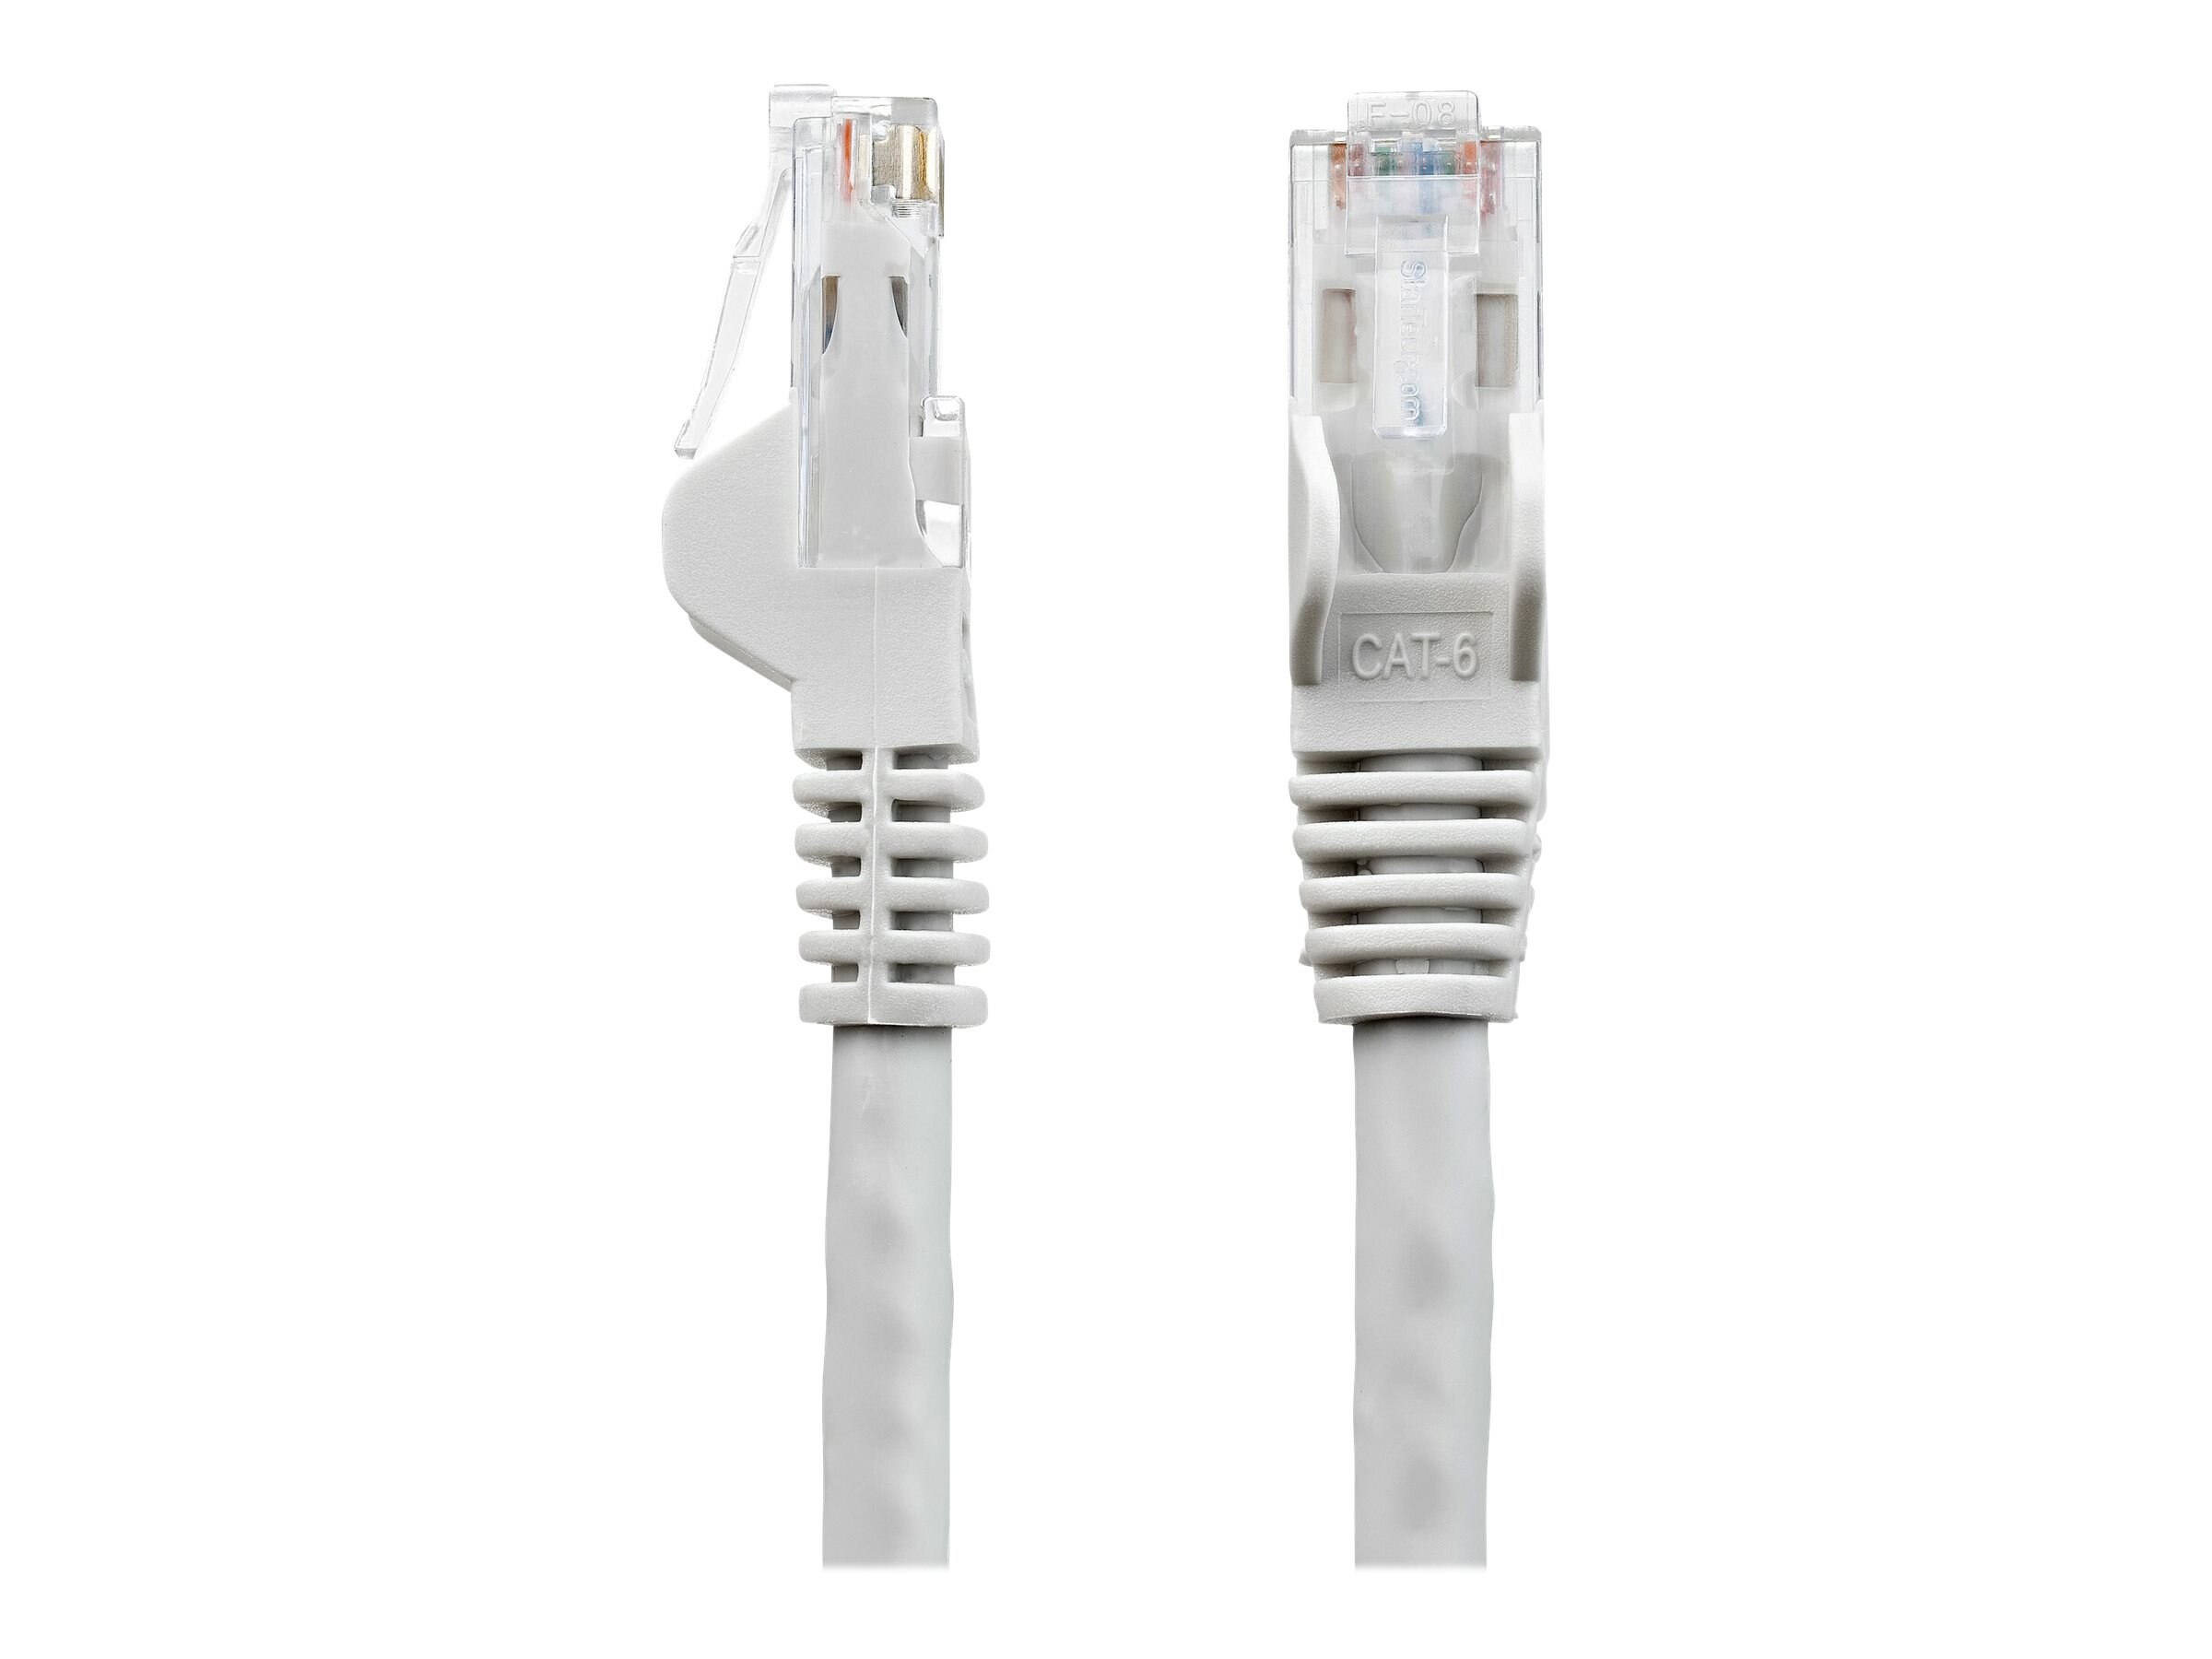 Shop  StarTech.com 35ft CAT6 Ethernet Cable - 10 Gigabit Snagless RJ45  650MHz 100W PoE Patch Cord - CAT 6 10GbE UTP Network Cable w/Strain Relief  - Blue - Fluke Tested/Wiring is